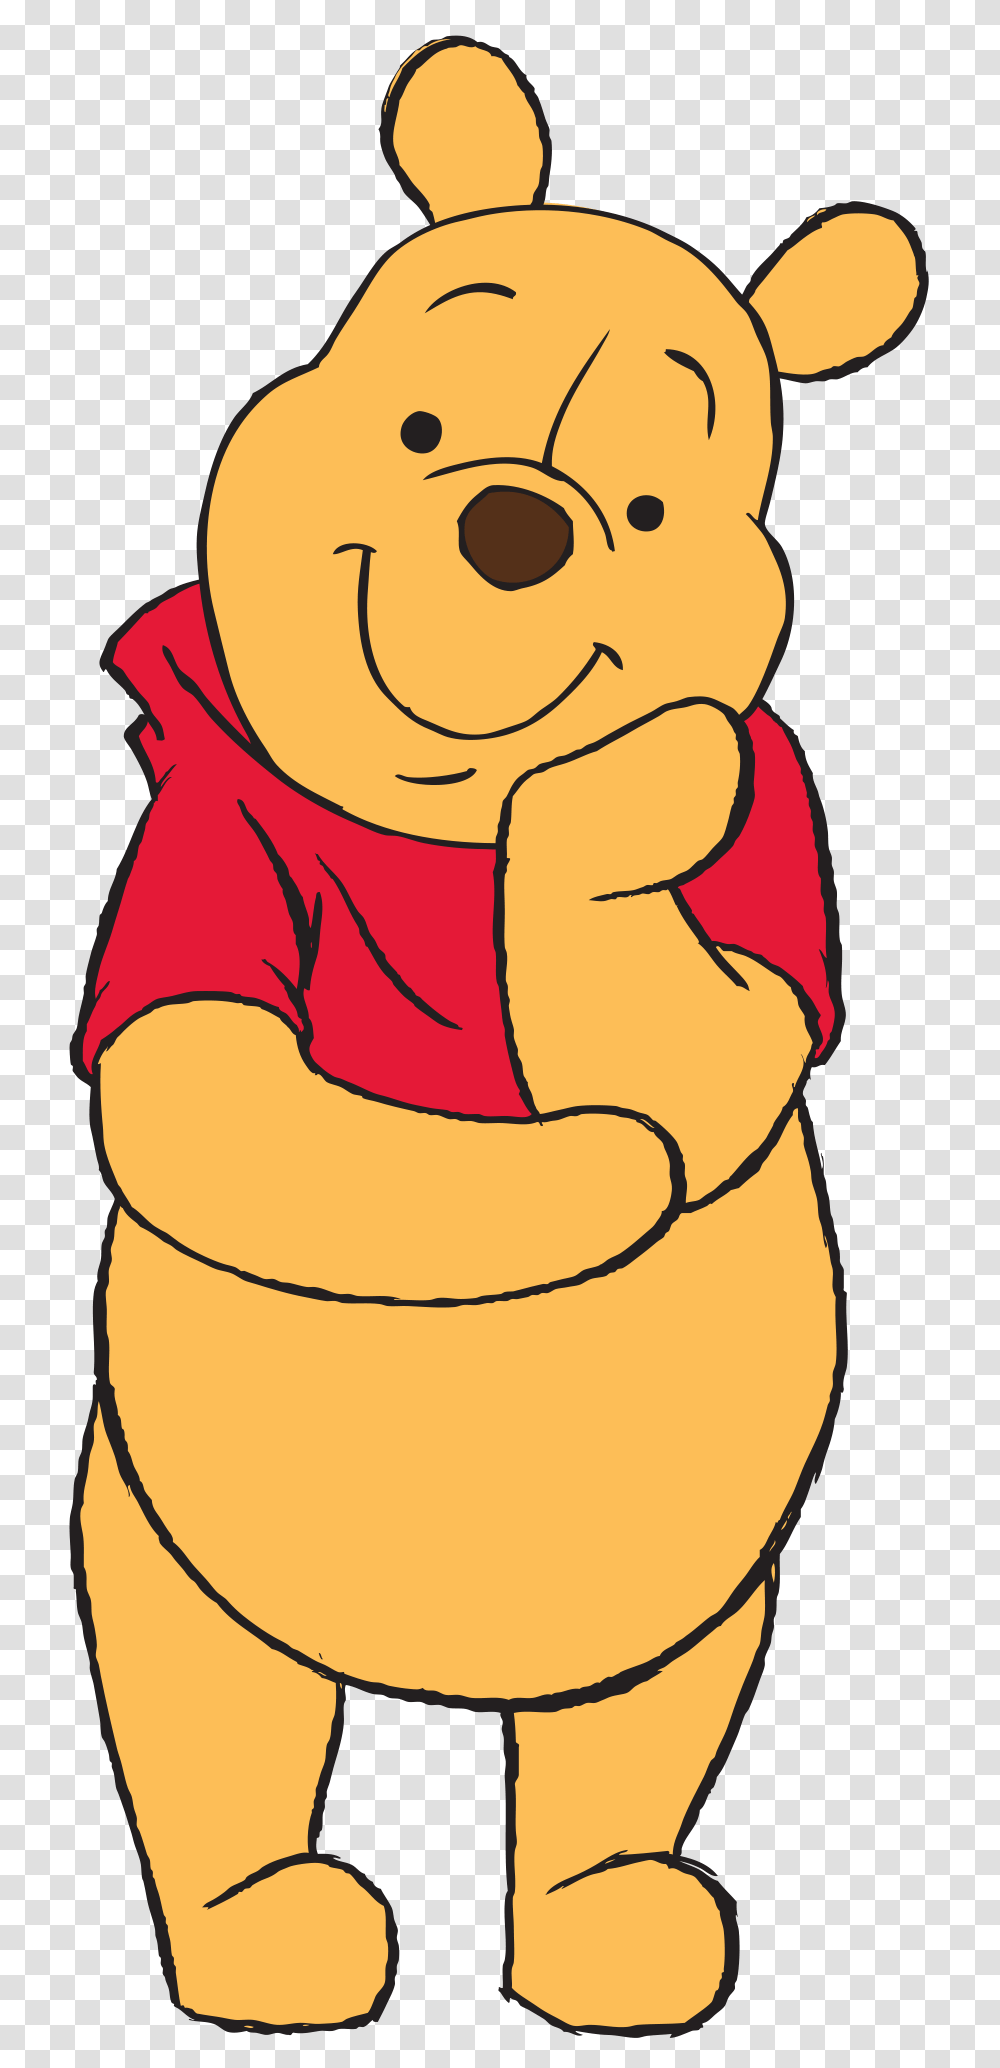 Winnie Pooh Image Winnie The Pooh, Hand, Finger Transparent Png